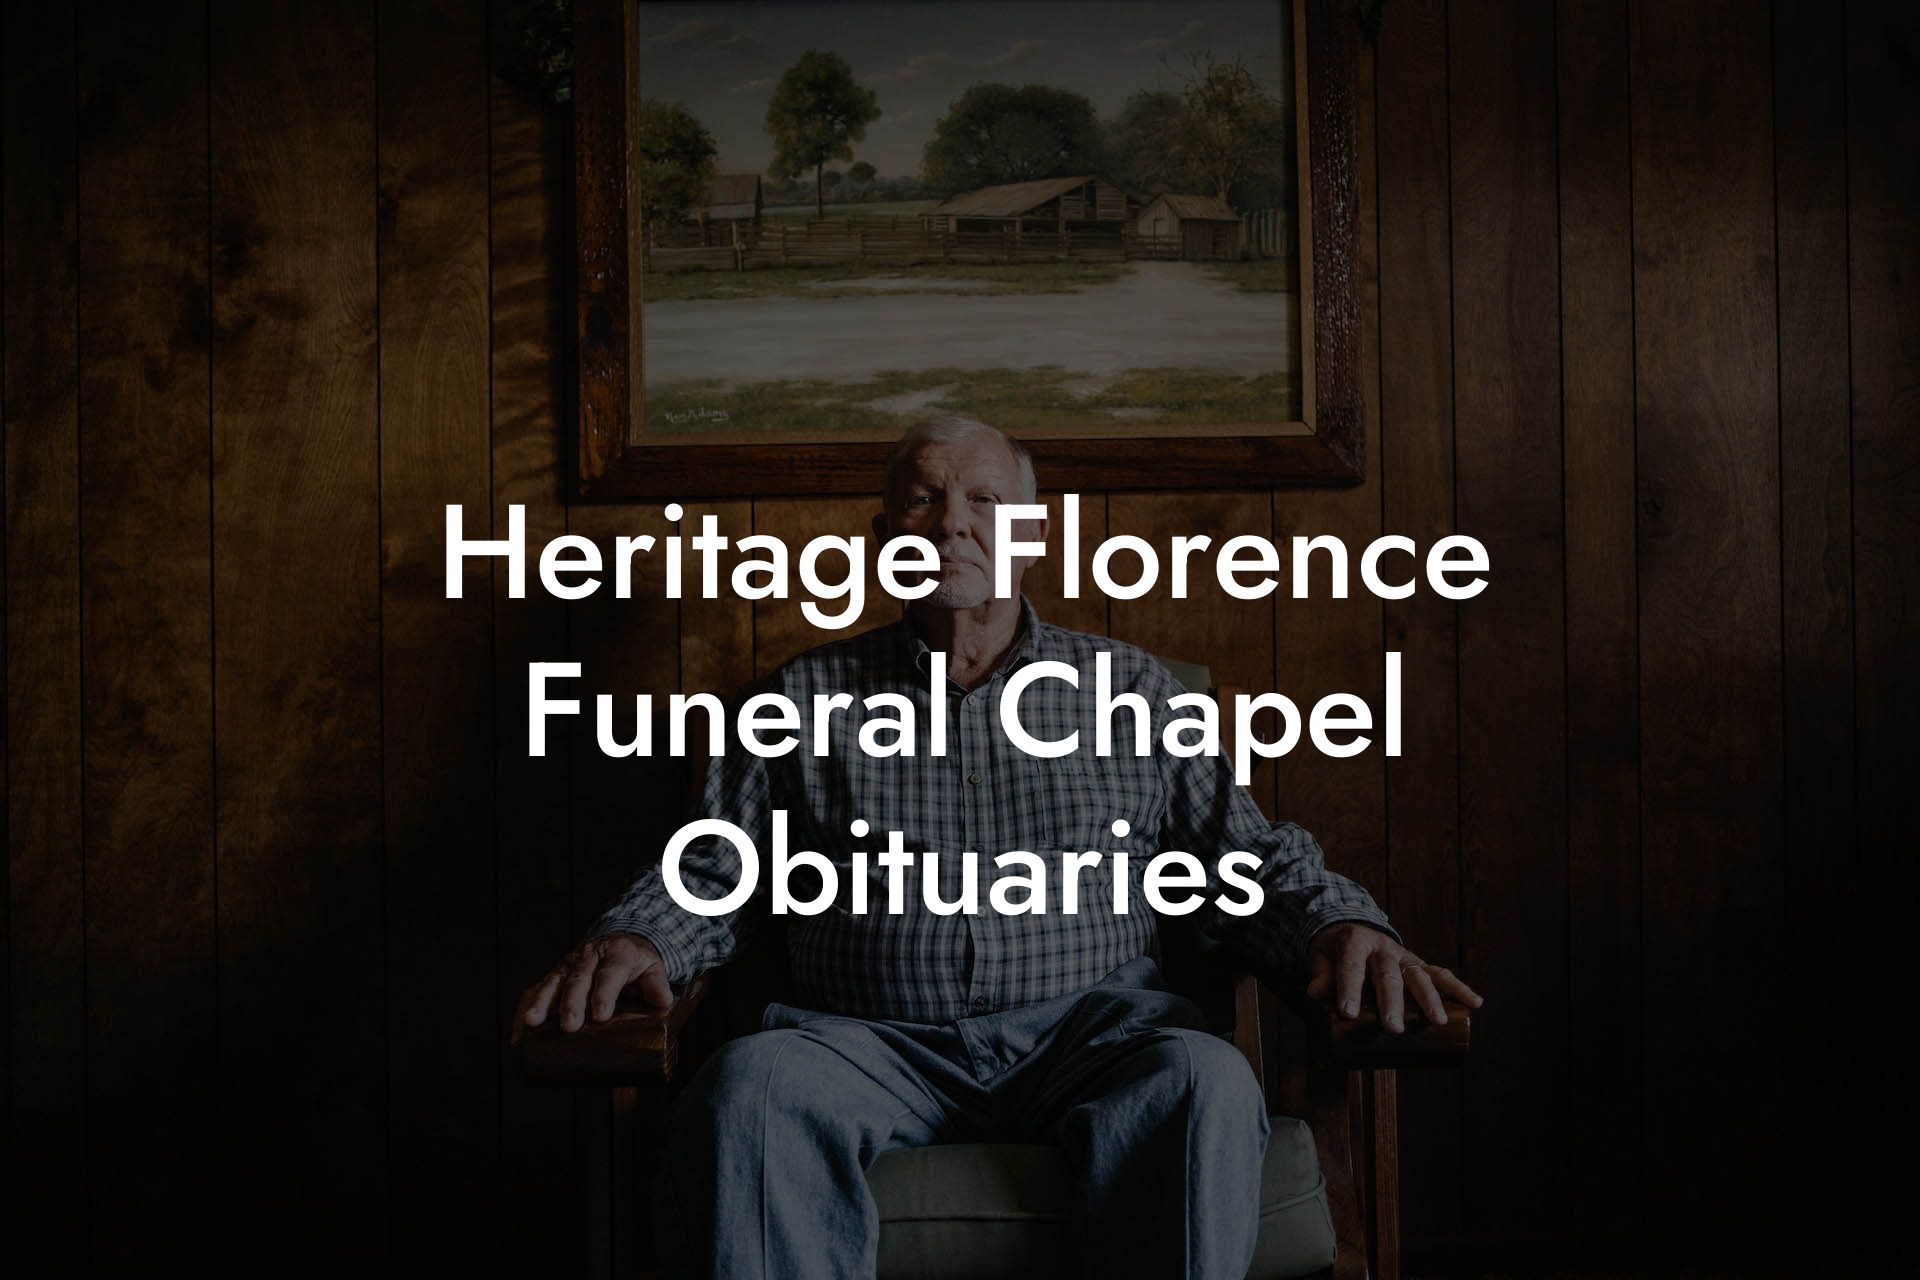 Heritage Florence Funeral Chapel Obituaries